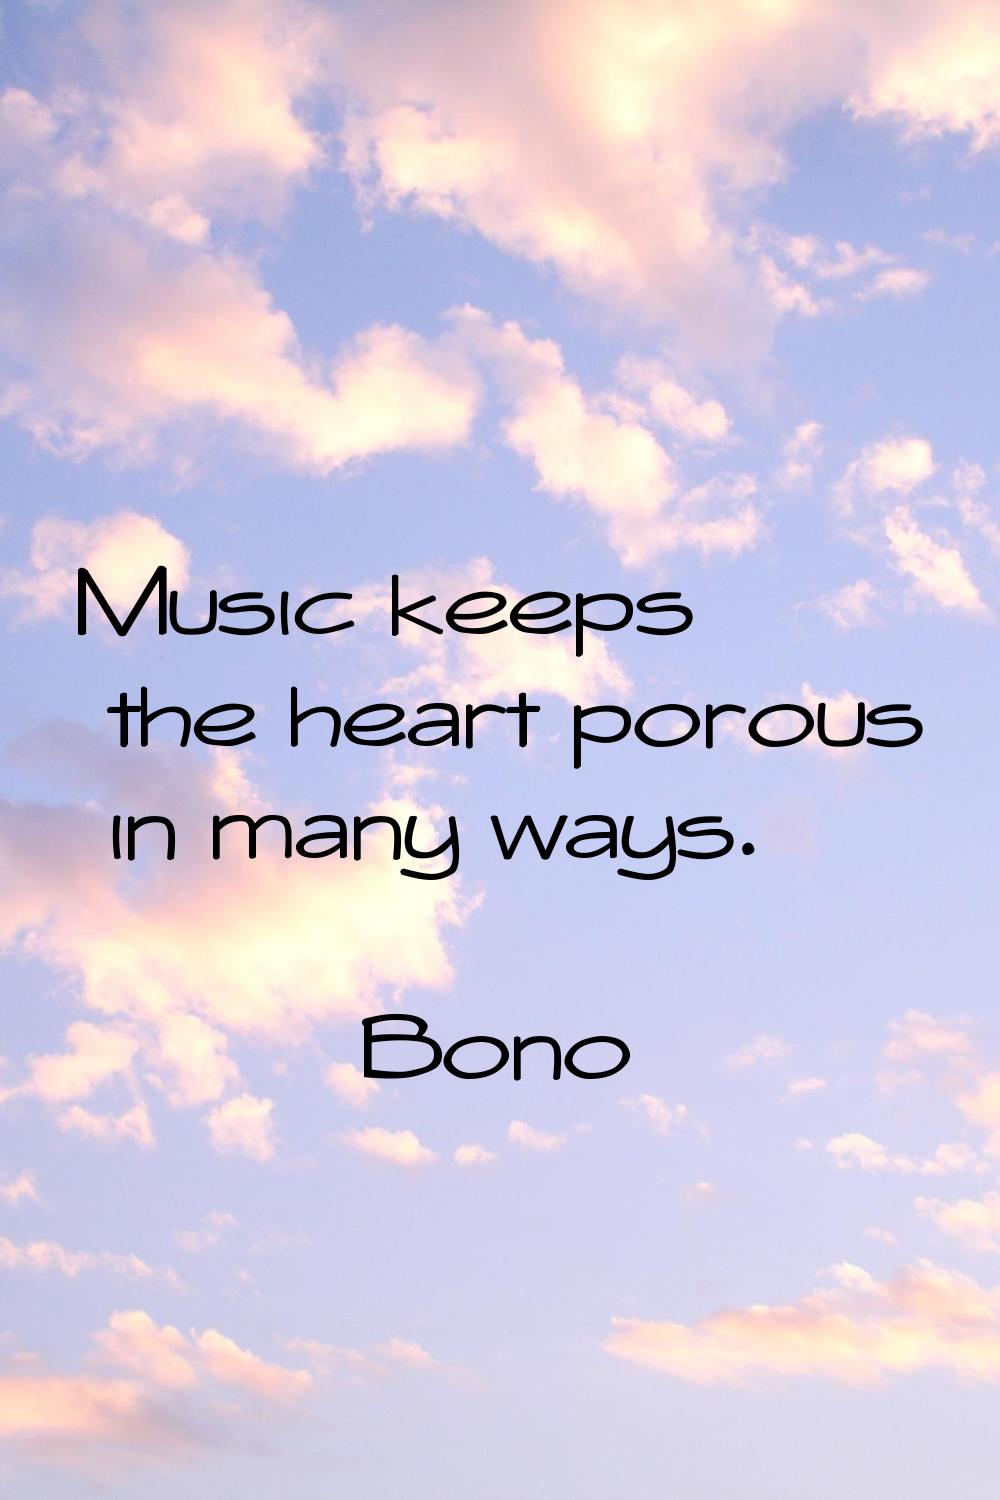 Music keeps the heart porous in many ways.